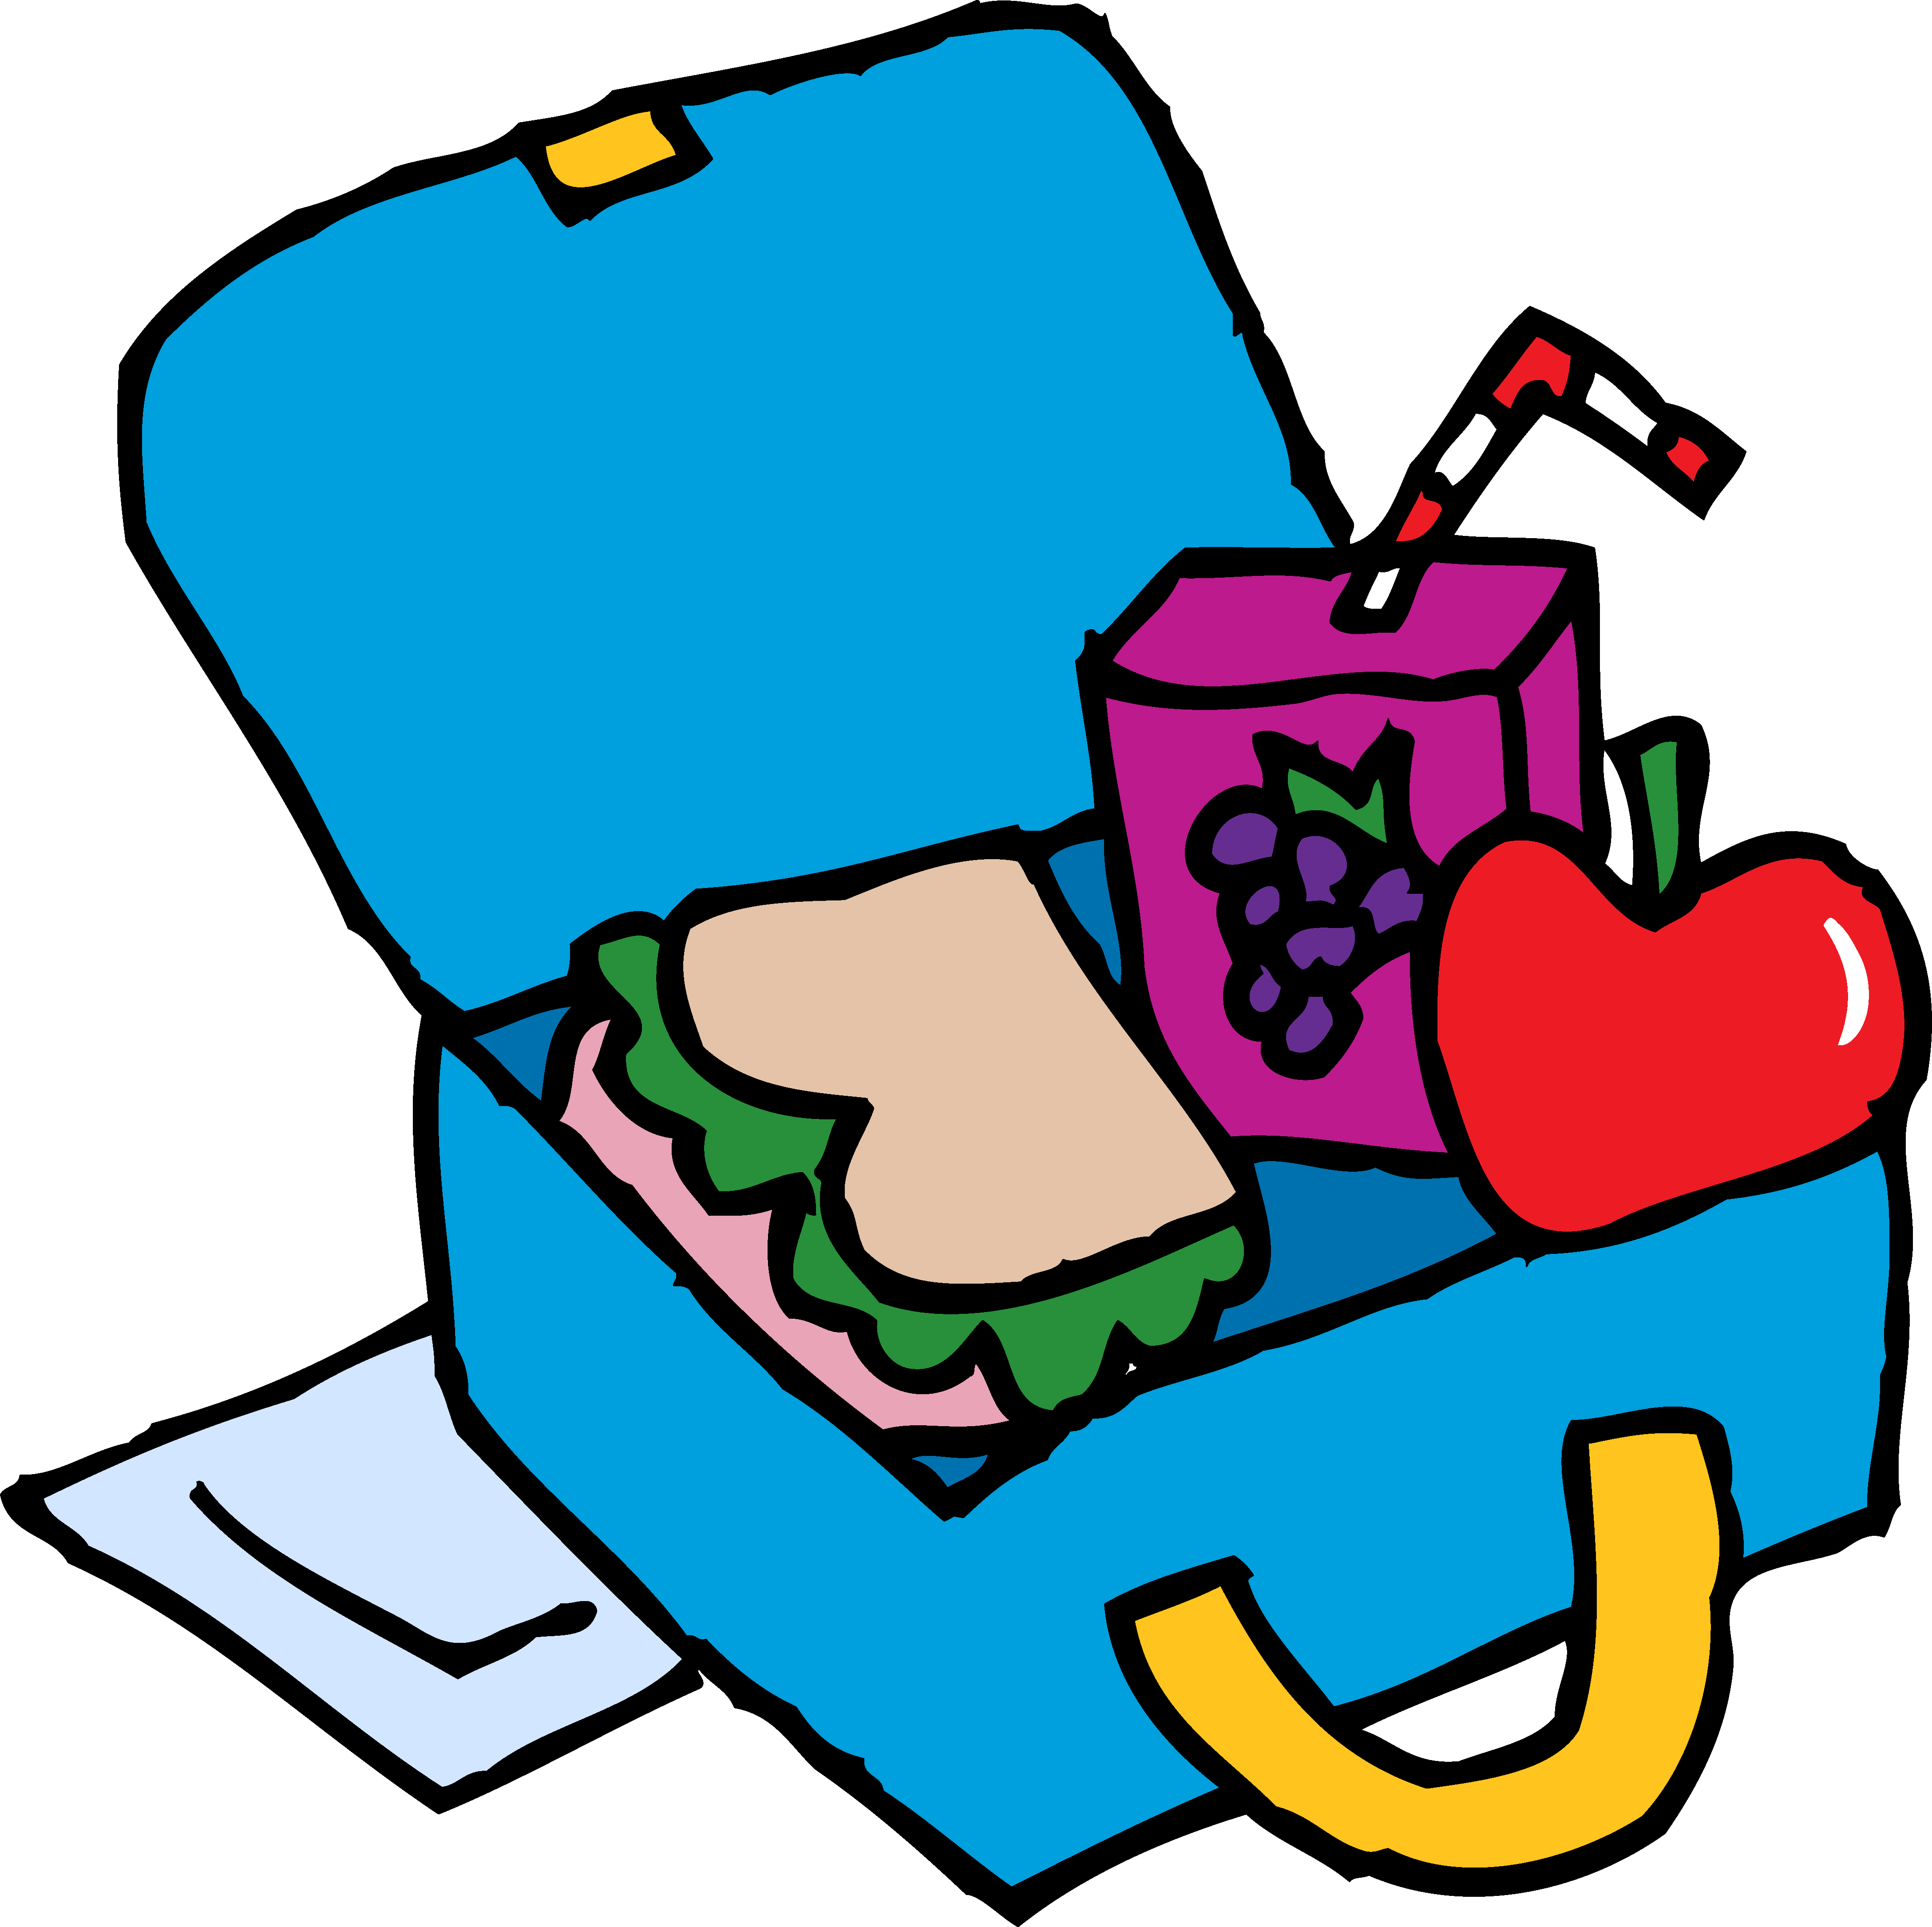 Lunch bag clipart free clipart images